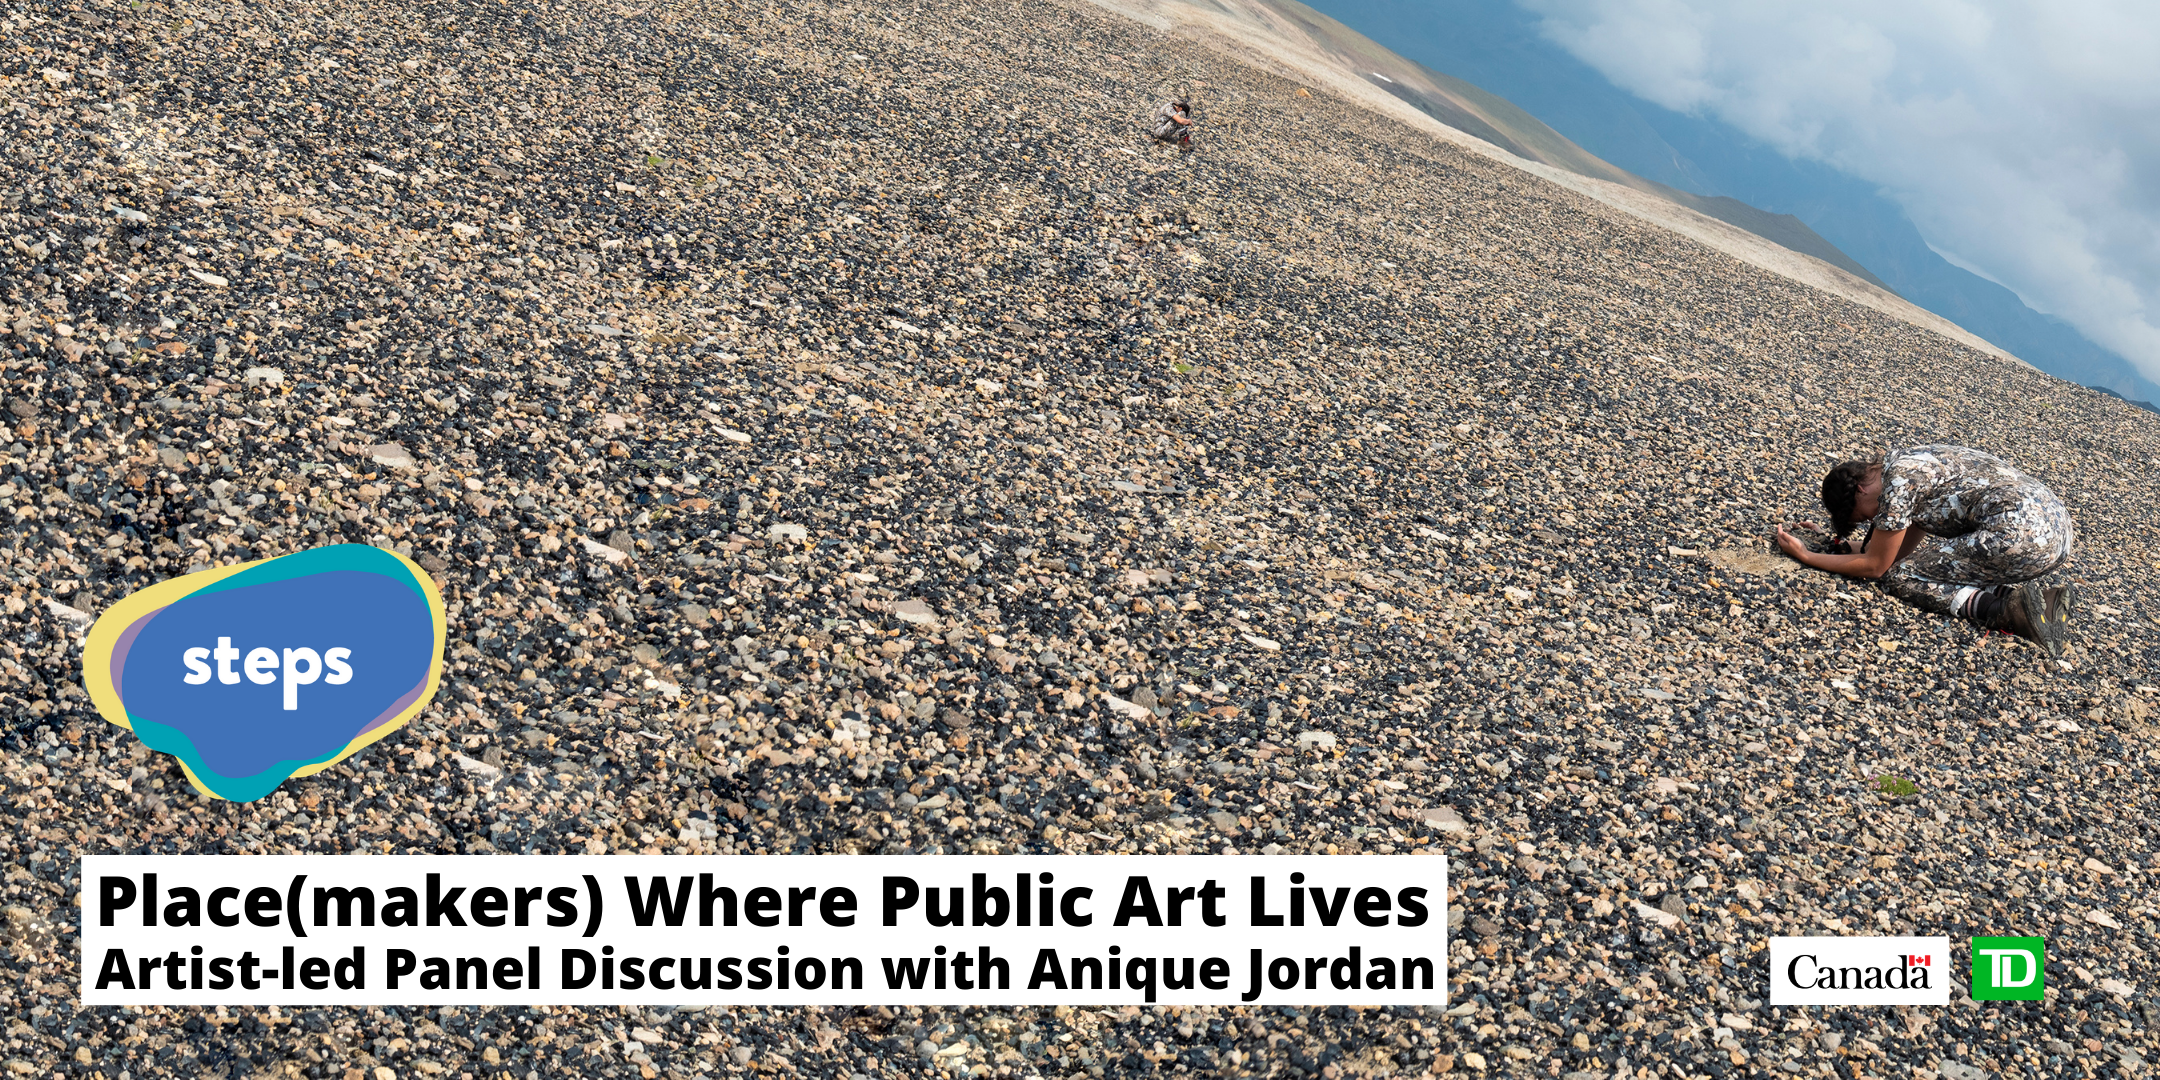 In a desolate-looking field filled with small rocks, a person in solitude is seen on the right in a prayer position touching the land. The logo for STEPS is seen on the left with text "Place(makers) Where Public Art Lives: Artist-led Panel Discussion with Anique Jordan"; Canada and TD logos at bottom right.